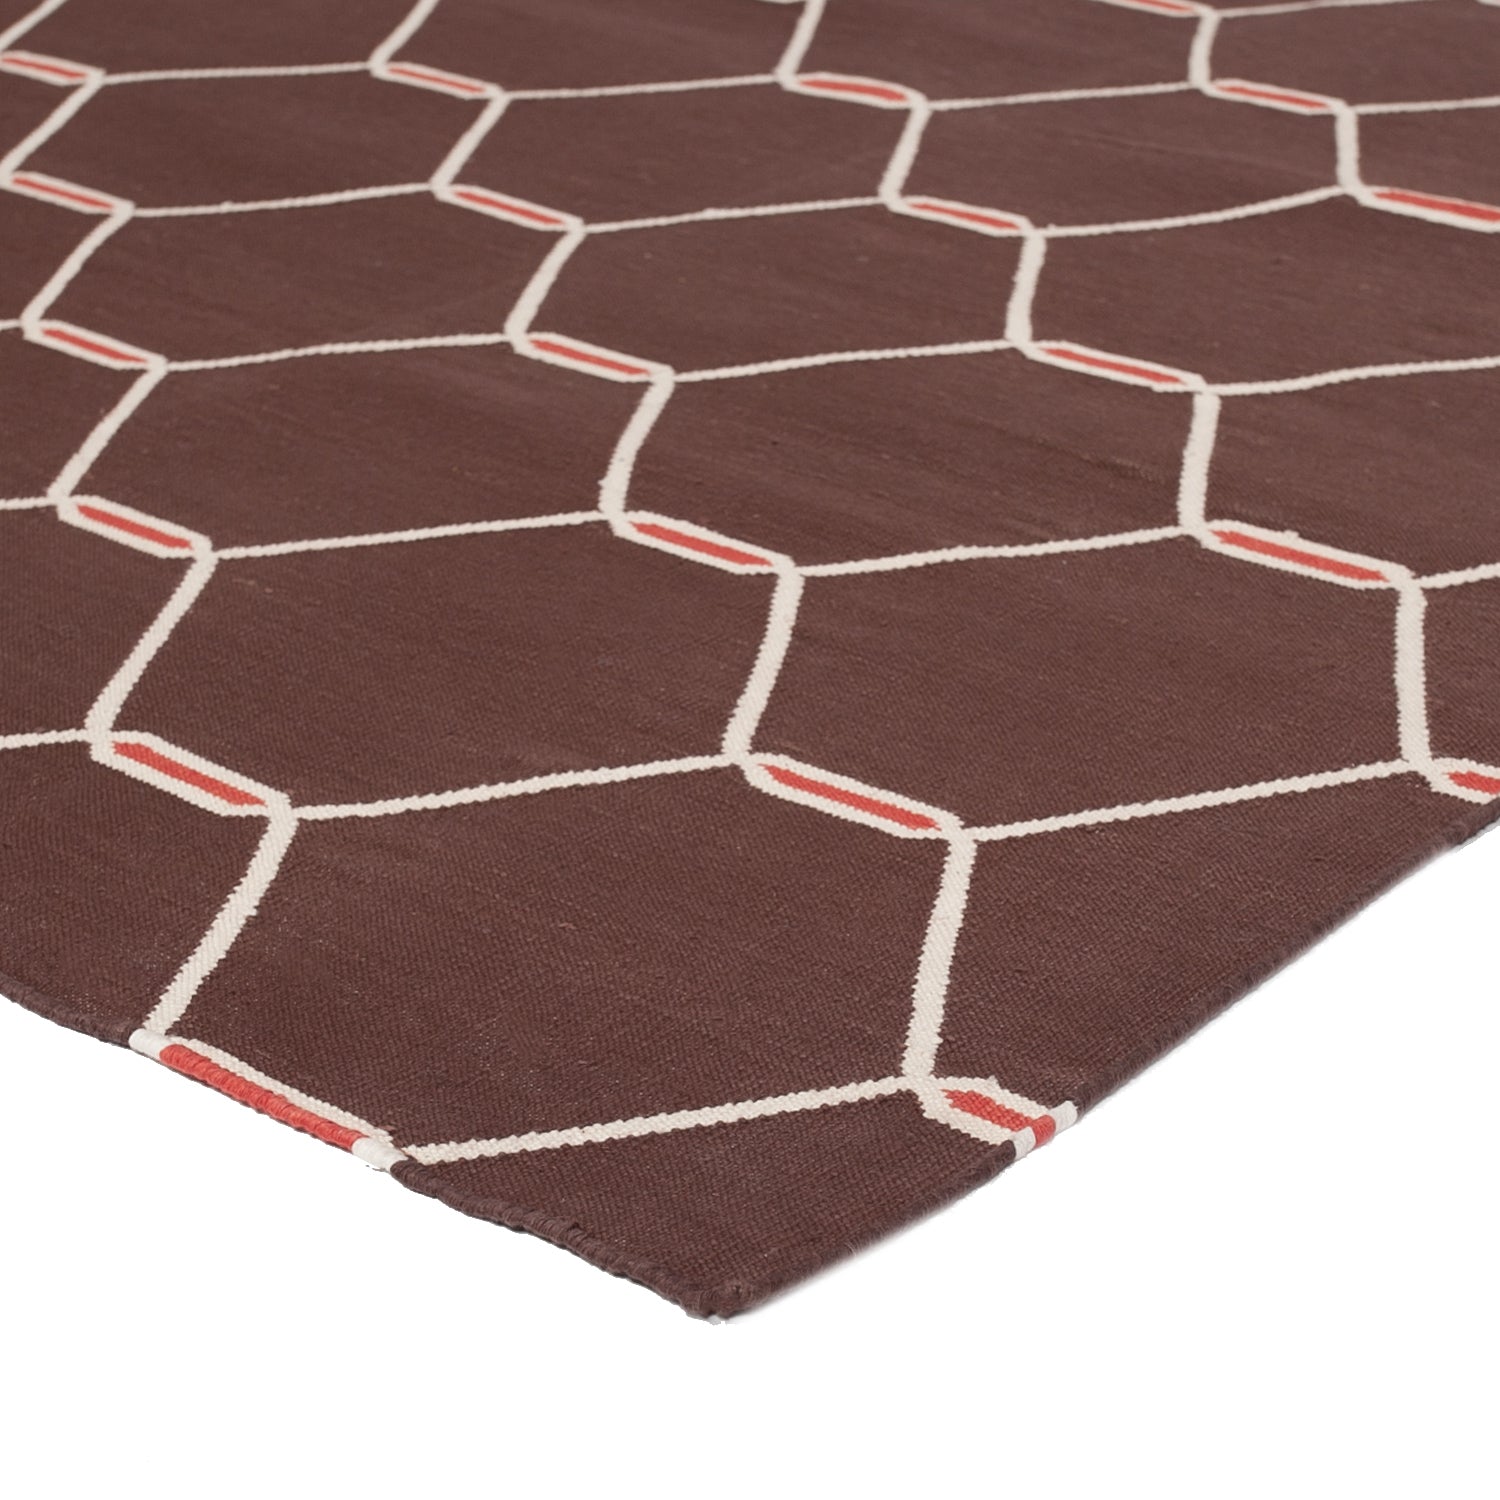 Close-up of brown fabric with white hexagon pattern and texture.